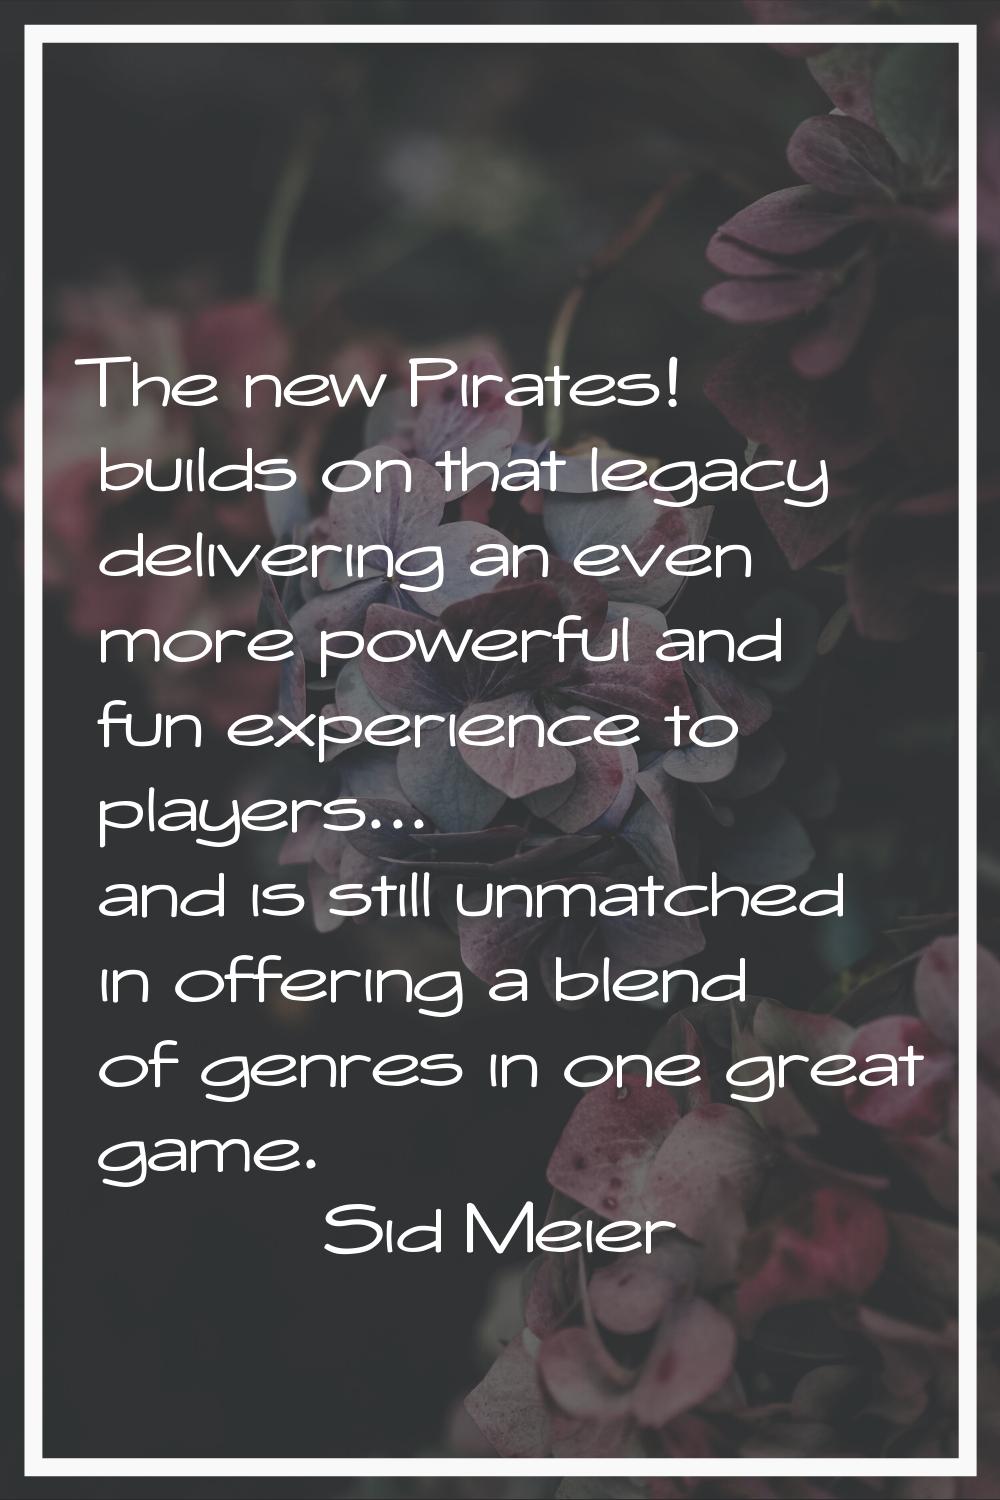 The new Pirates! builds on that legacy delivering an even more powerful and fun experience to playe